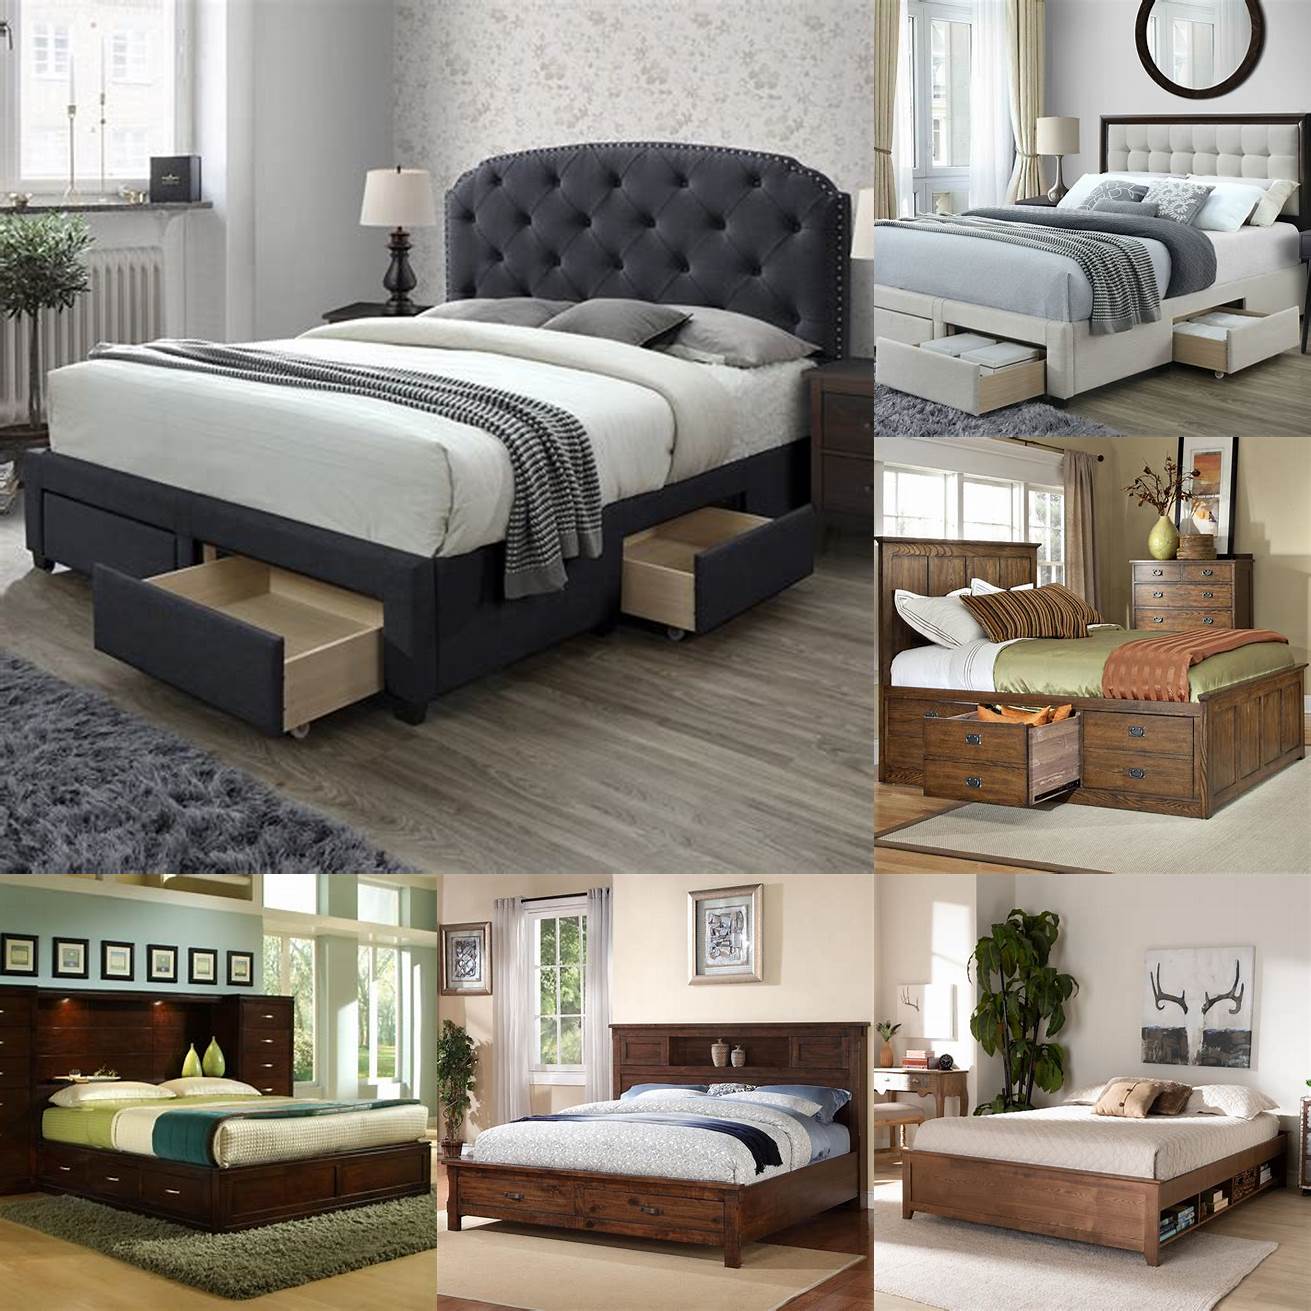 Image of a King Bed Frame With Drawers with a wooden headboard